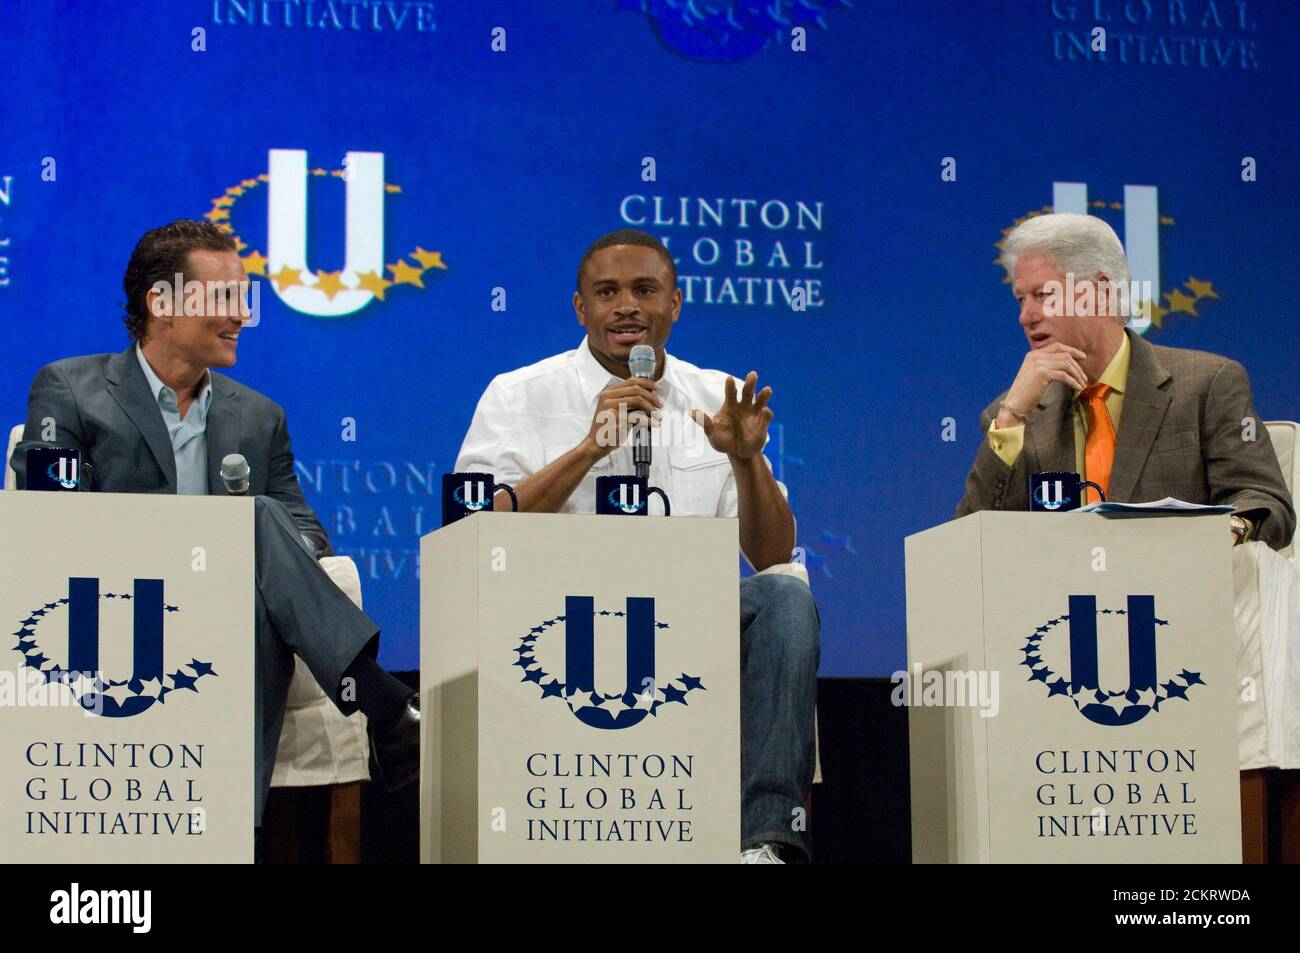 Austin, TX February 14, 2009: Former President Bill Clinton (r) hosts the second annual Clinton Global Initiative University, a conference bringing together more than 1,000 students to take action on global challenges such as poverty, hunger, energy, climate change and global health. Left to right are actor Matthew McConaughey, NFL player Nnamdi Asomugha and Clinton.  ©Bob Daemmrich Stock Photo